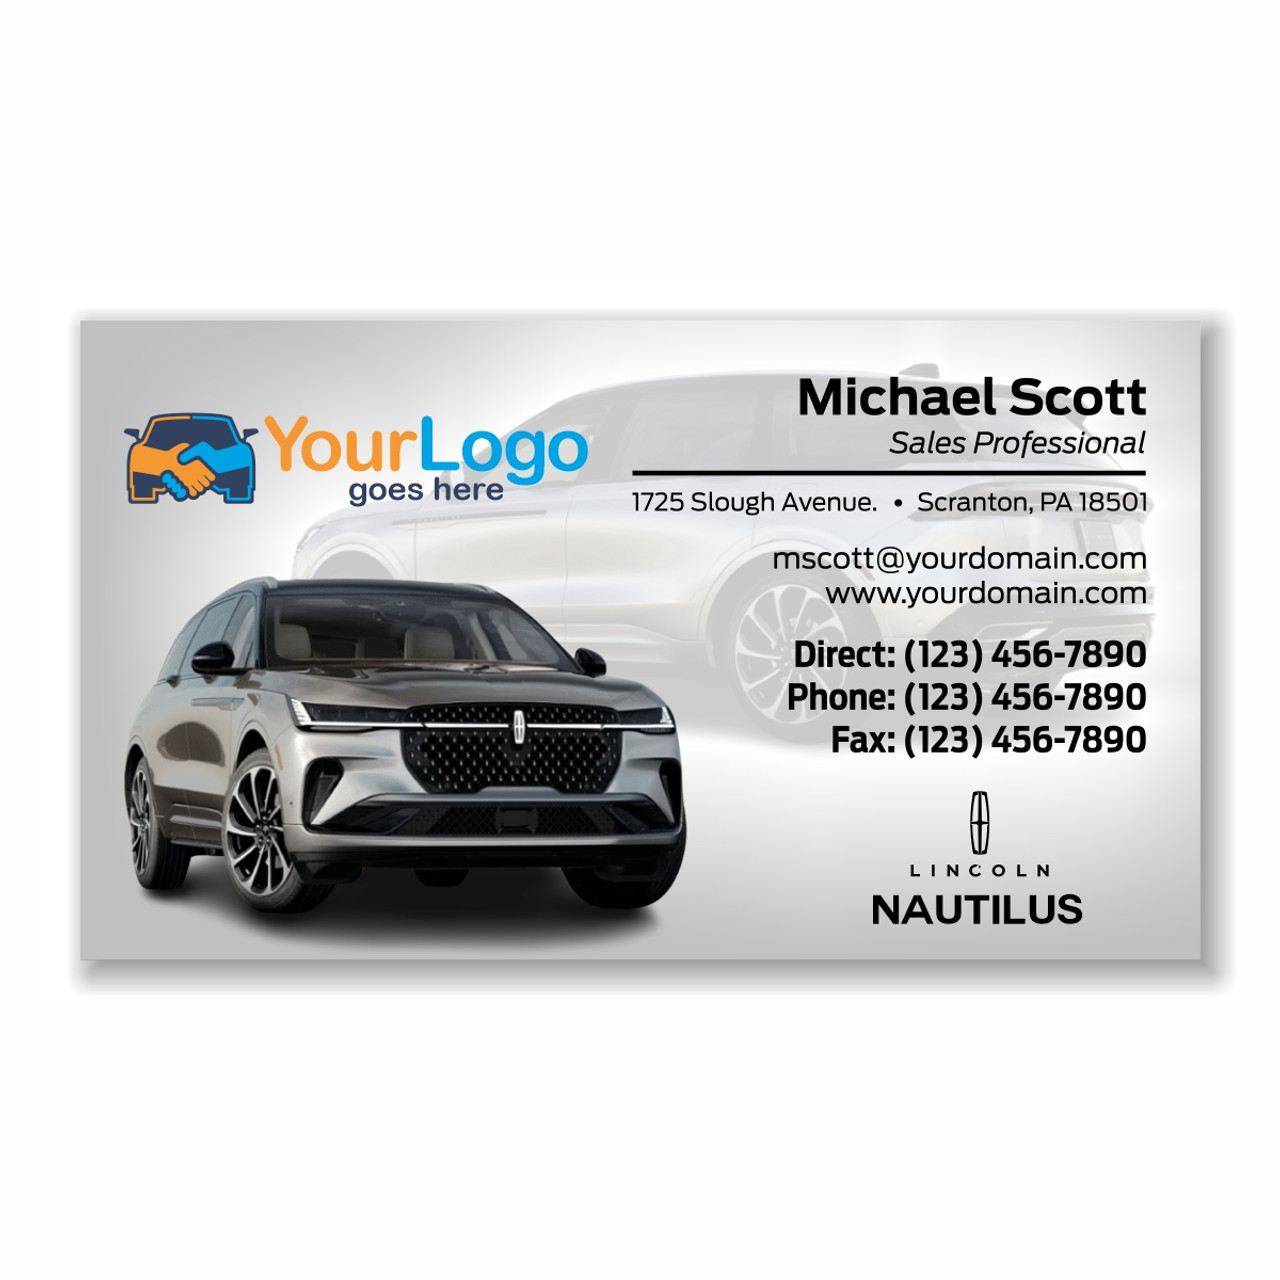 Lincoln Nautilus Business Cards 01